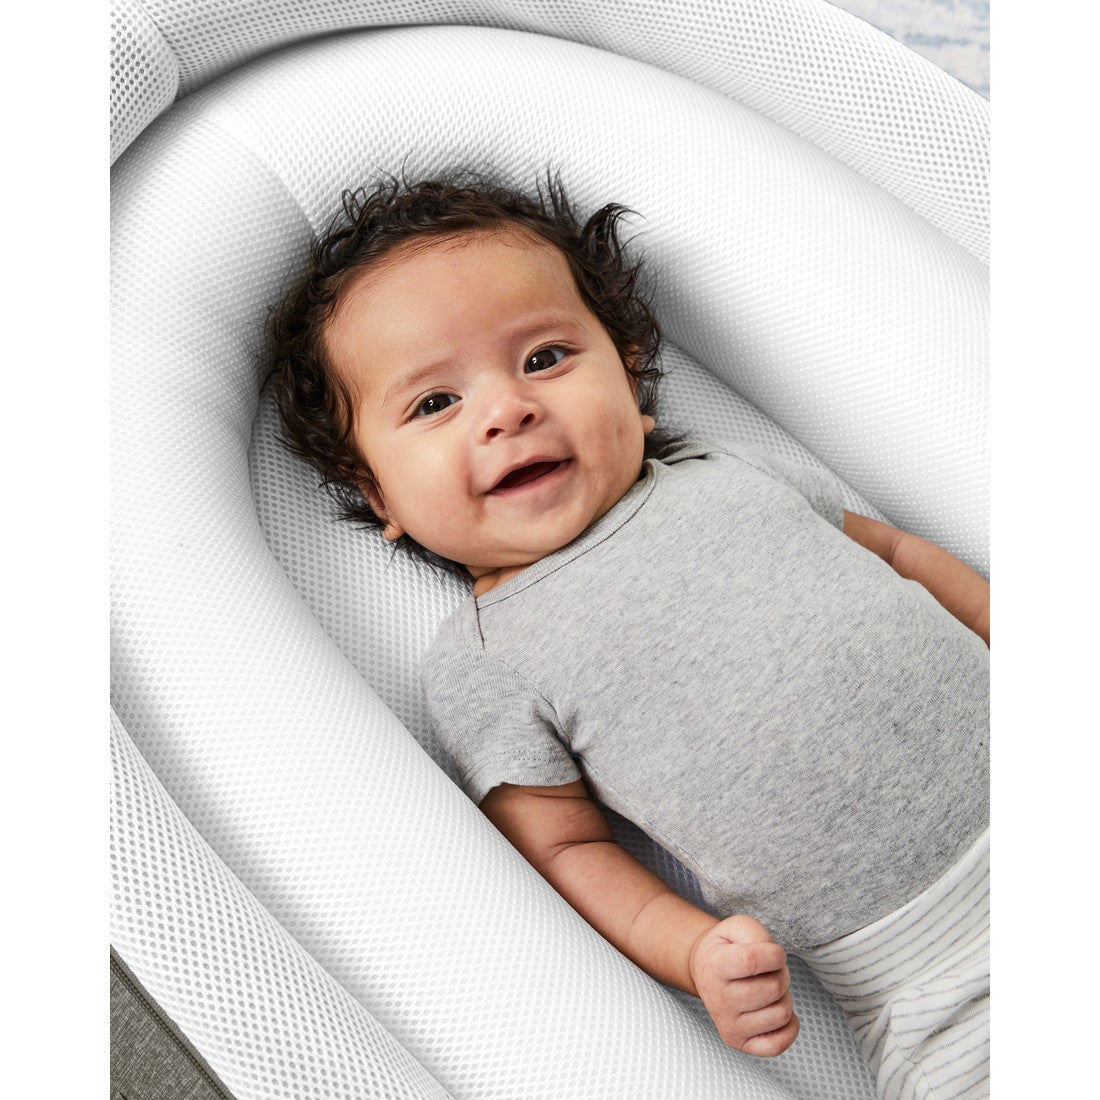 Skip Hop Sweet Retreat 2-Stage Baby Lounger Activity & Gear Grey 55.88